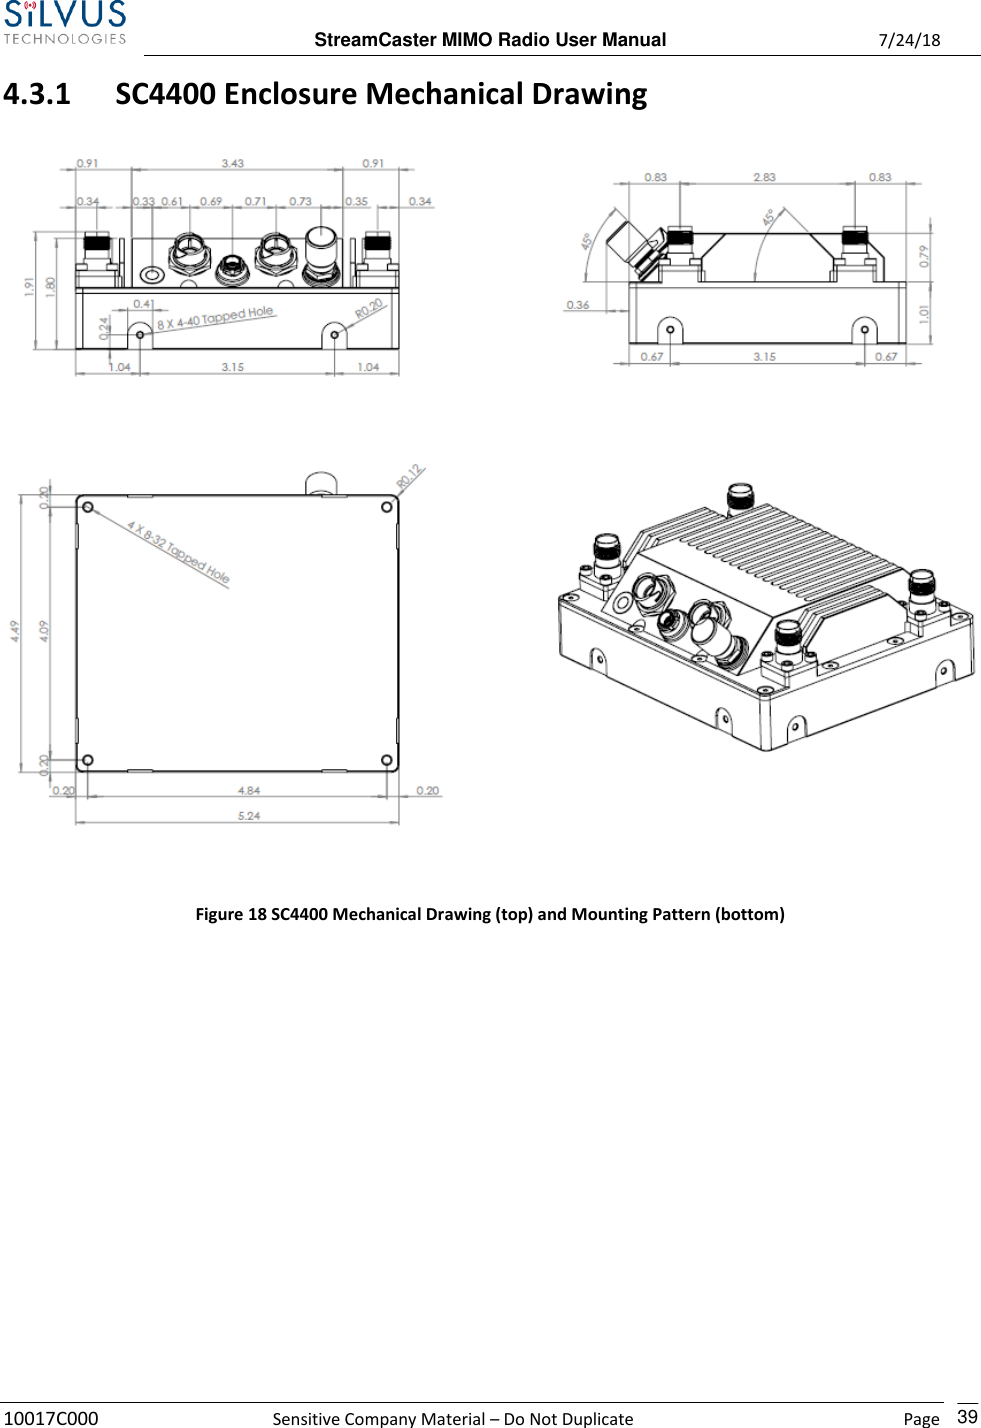  StreamCaster MIMO Radio User Manual  7/24/18 10017C000  Sensitive Company Material – Do Not Duplicate    Page    39 4.3.1 SC4400 Enclosure Mechanical Drawing    Figure 18 SC4400 Mechanical Drawing (top) and Mounting Pattern (bottom)        